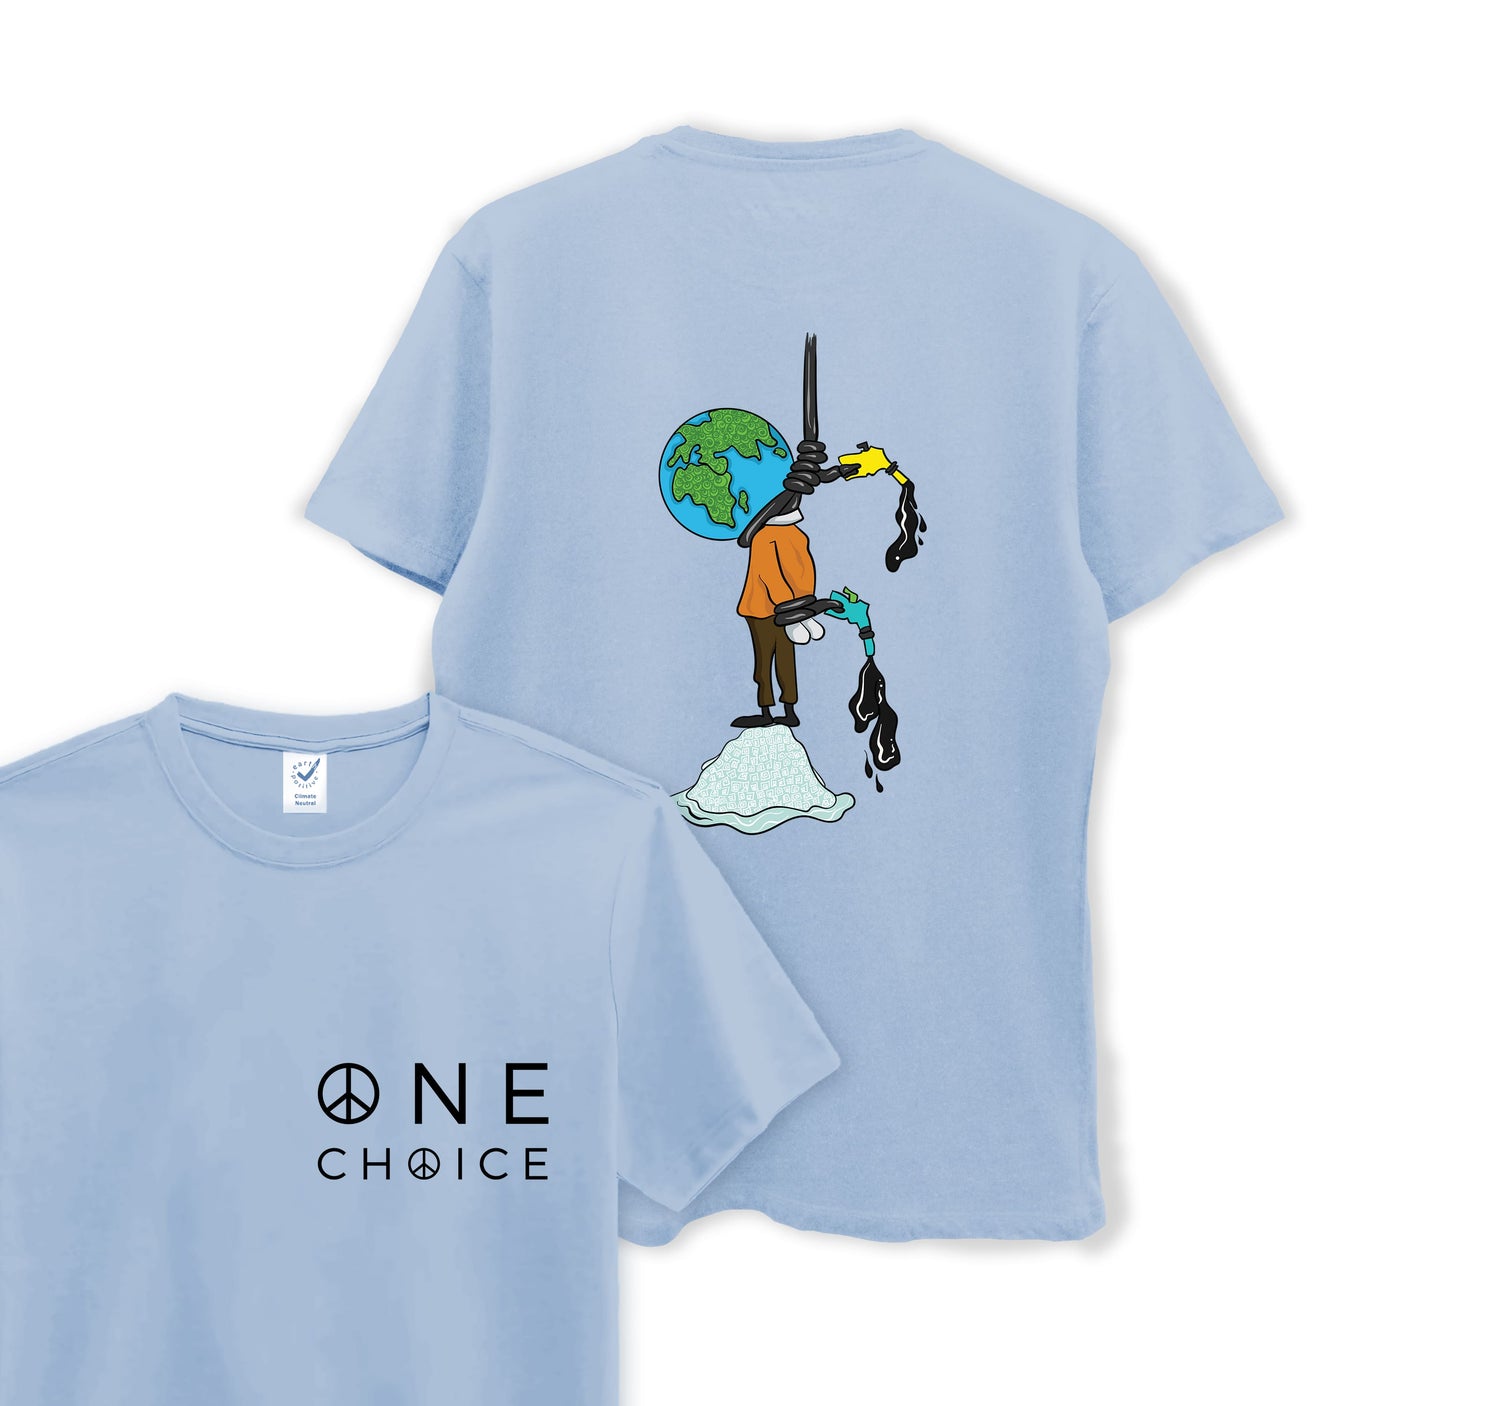 Ecocide - Climate Change Collection - Organic Cotton Tee - One Choice Apparel